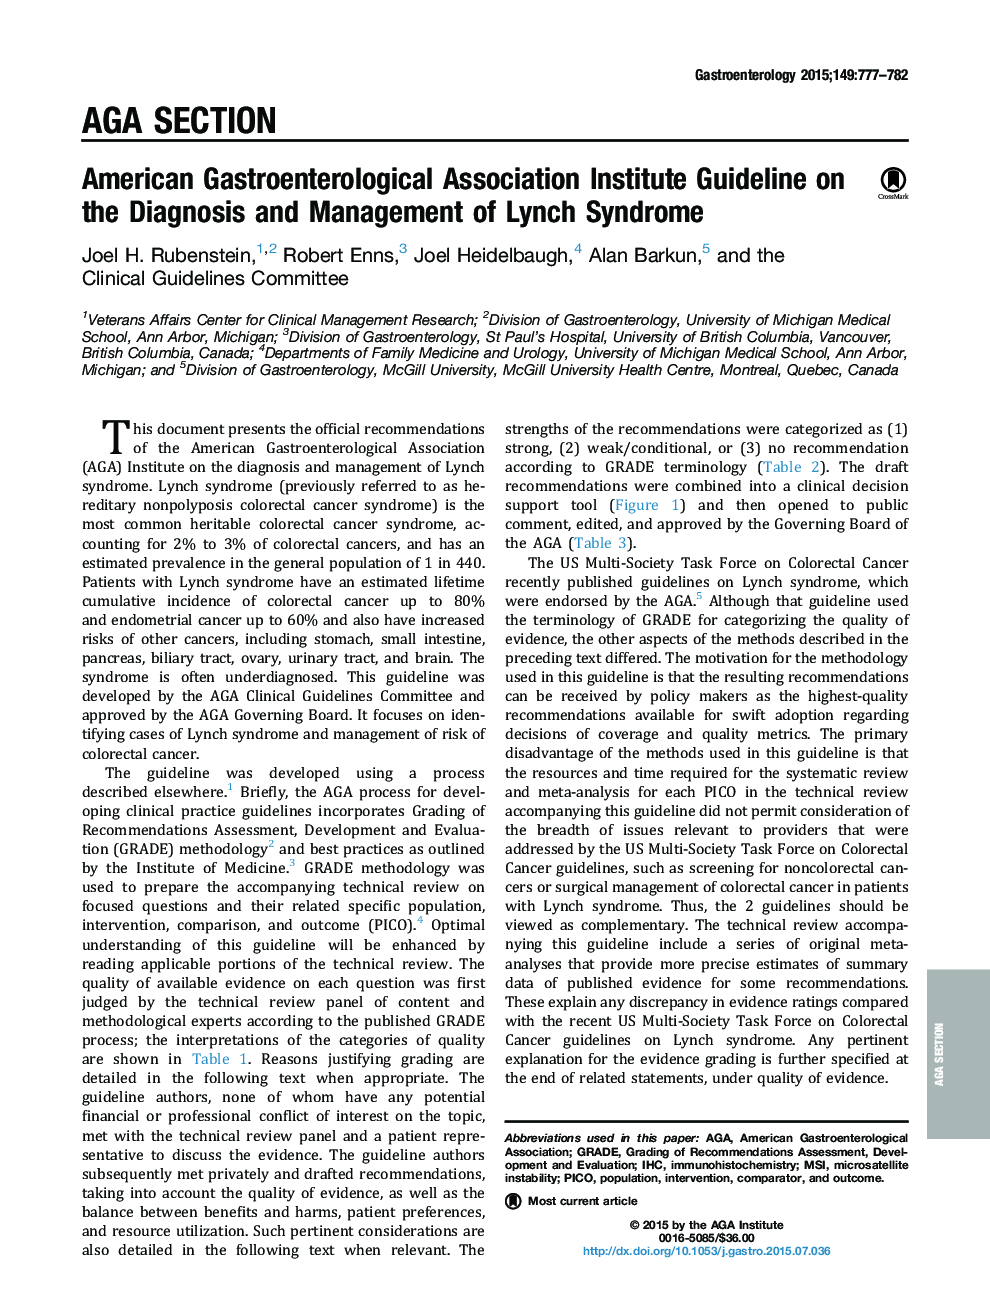 American Gastroenterological Association Institute Guideline on the Diagnosis and Management of Lynch Syndrome